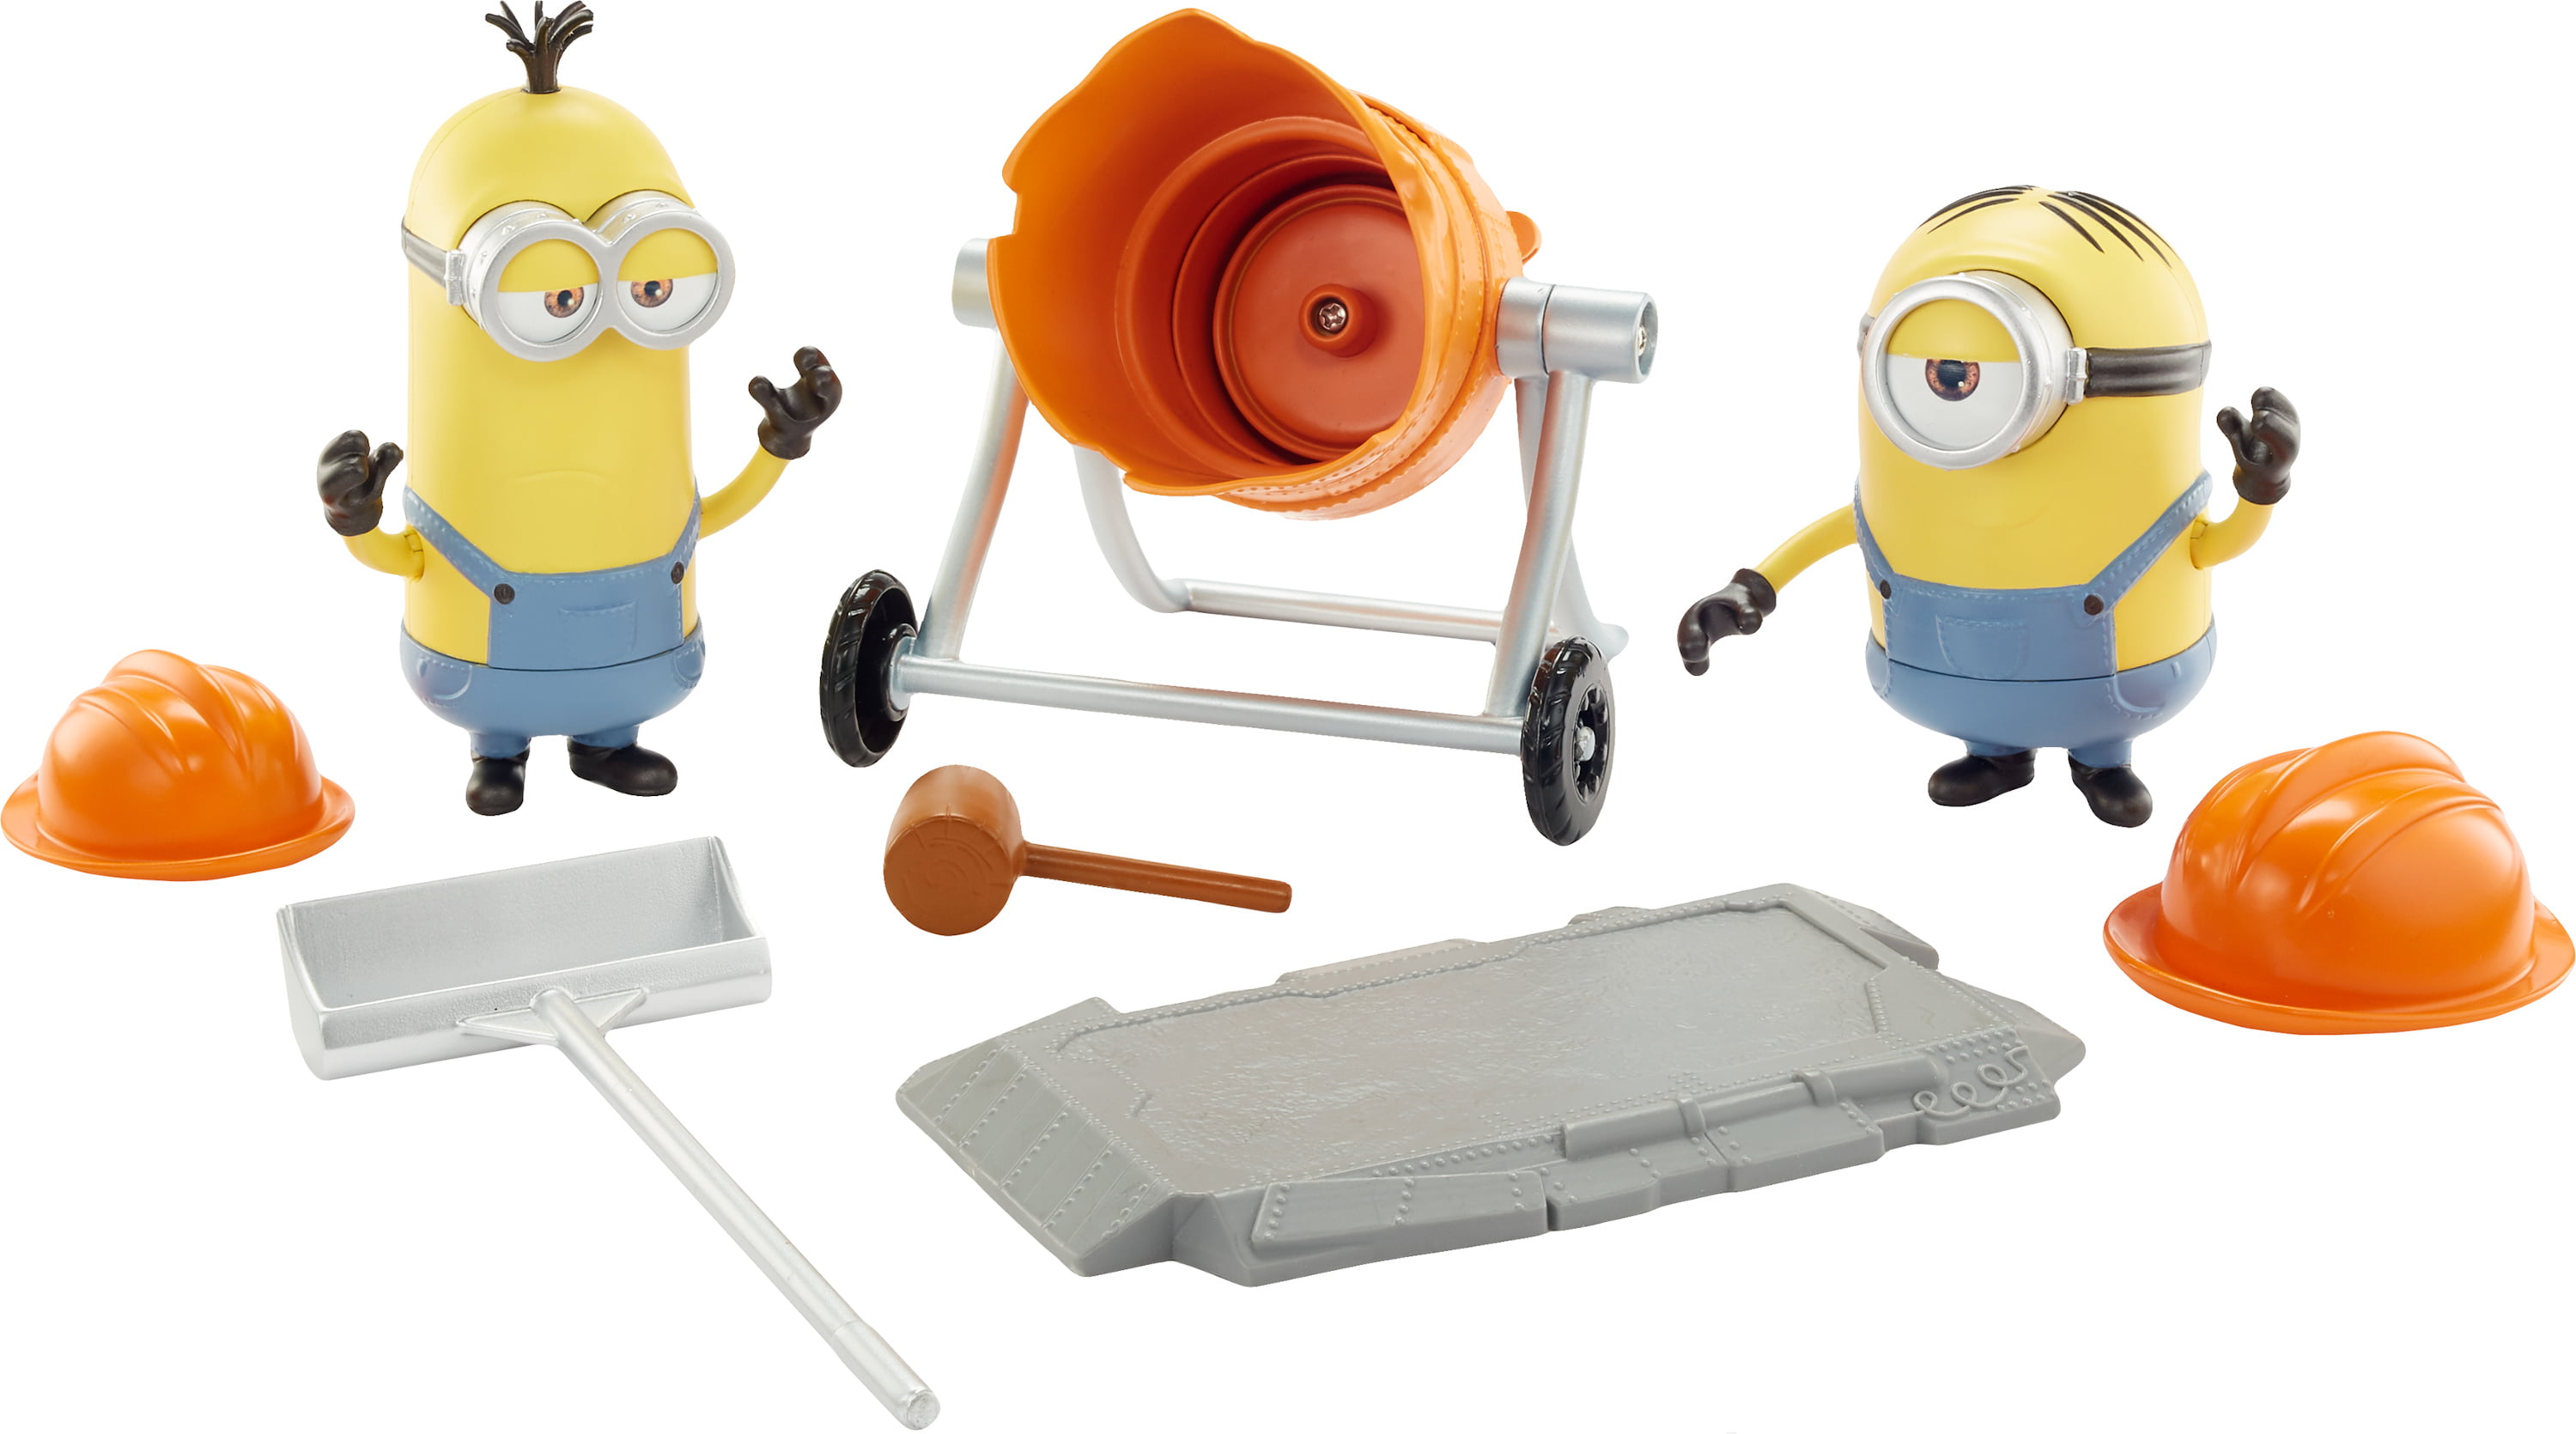 Minions Toys For Girls Cheaper Than Retail Price Buy Clothing Accessories And Lifestyle Products For Women Men